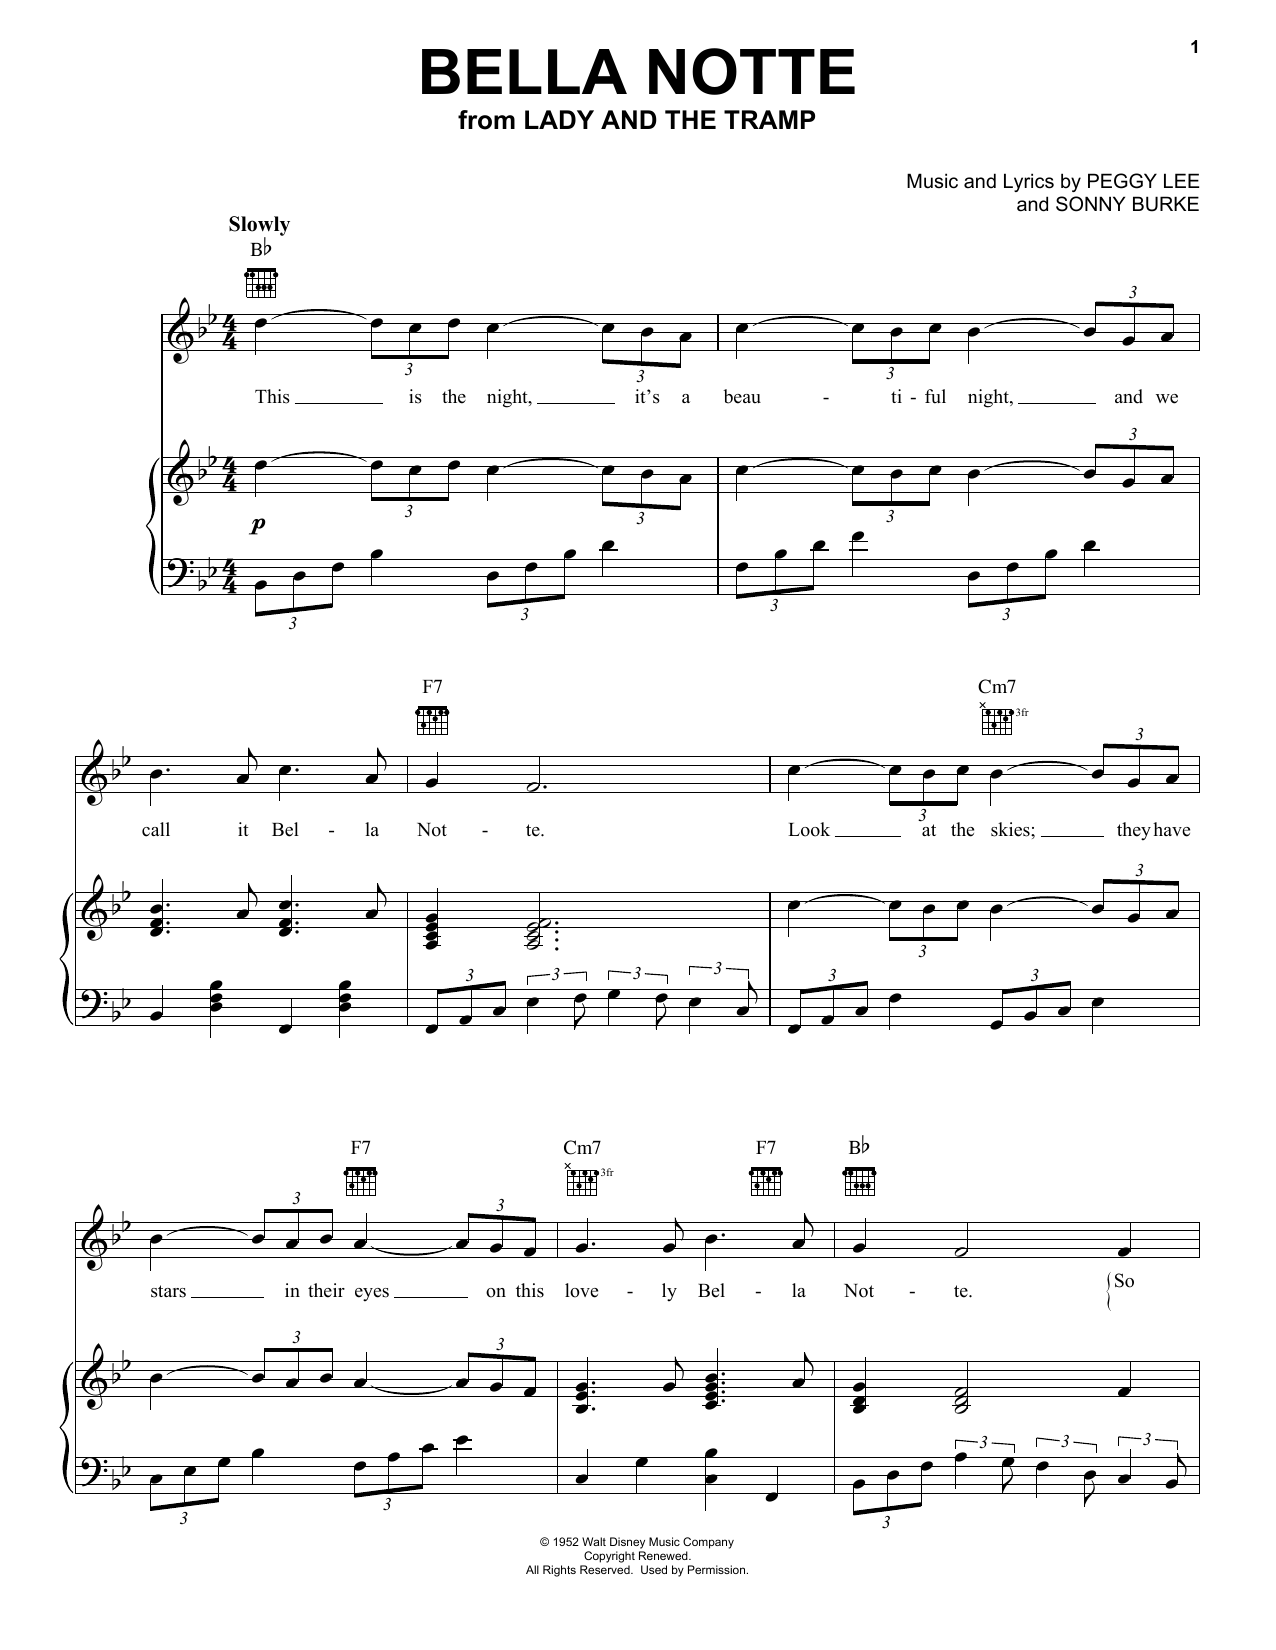 Peggy Lee Bella Notte (This Is The Night) (from Lady And The Tramp) sheet music notes printable PDF score